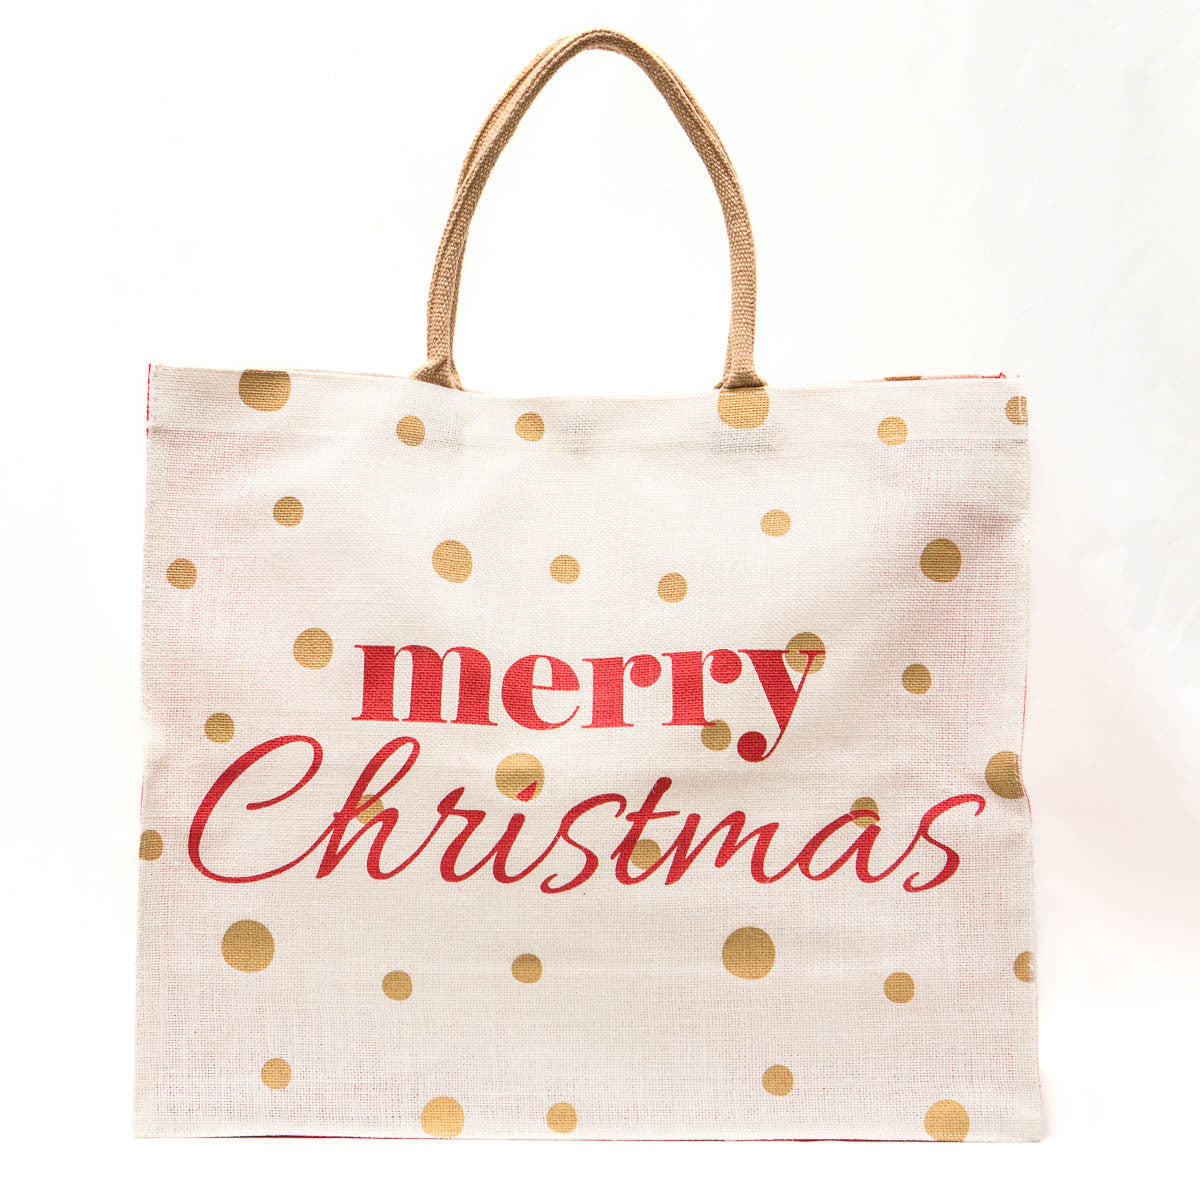 Merry Christmas Polka Dot Carryall Tote - Southern Grace Creations